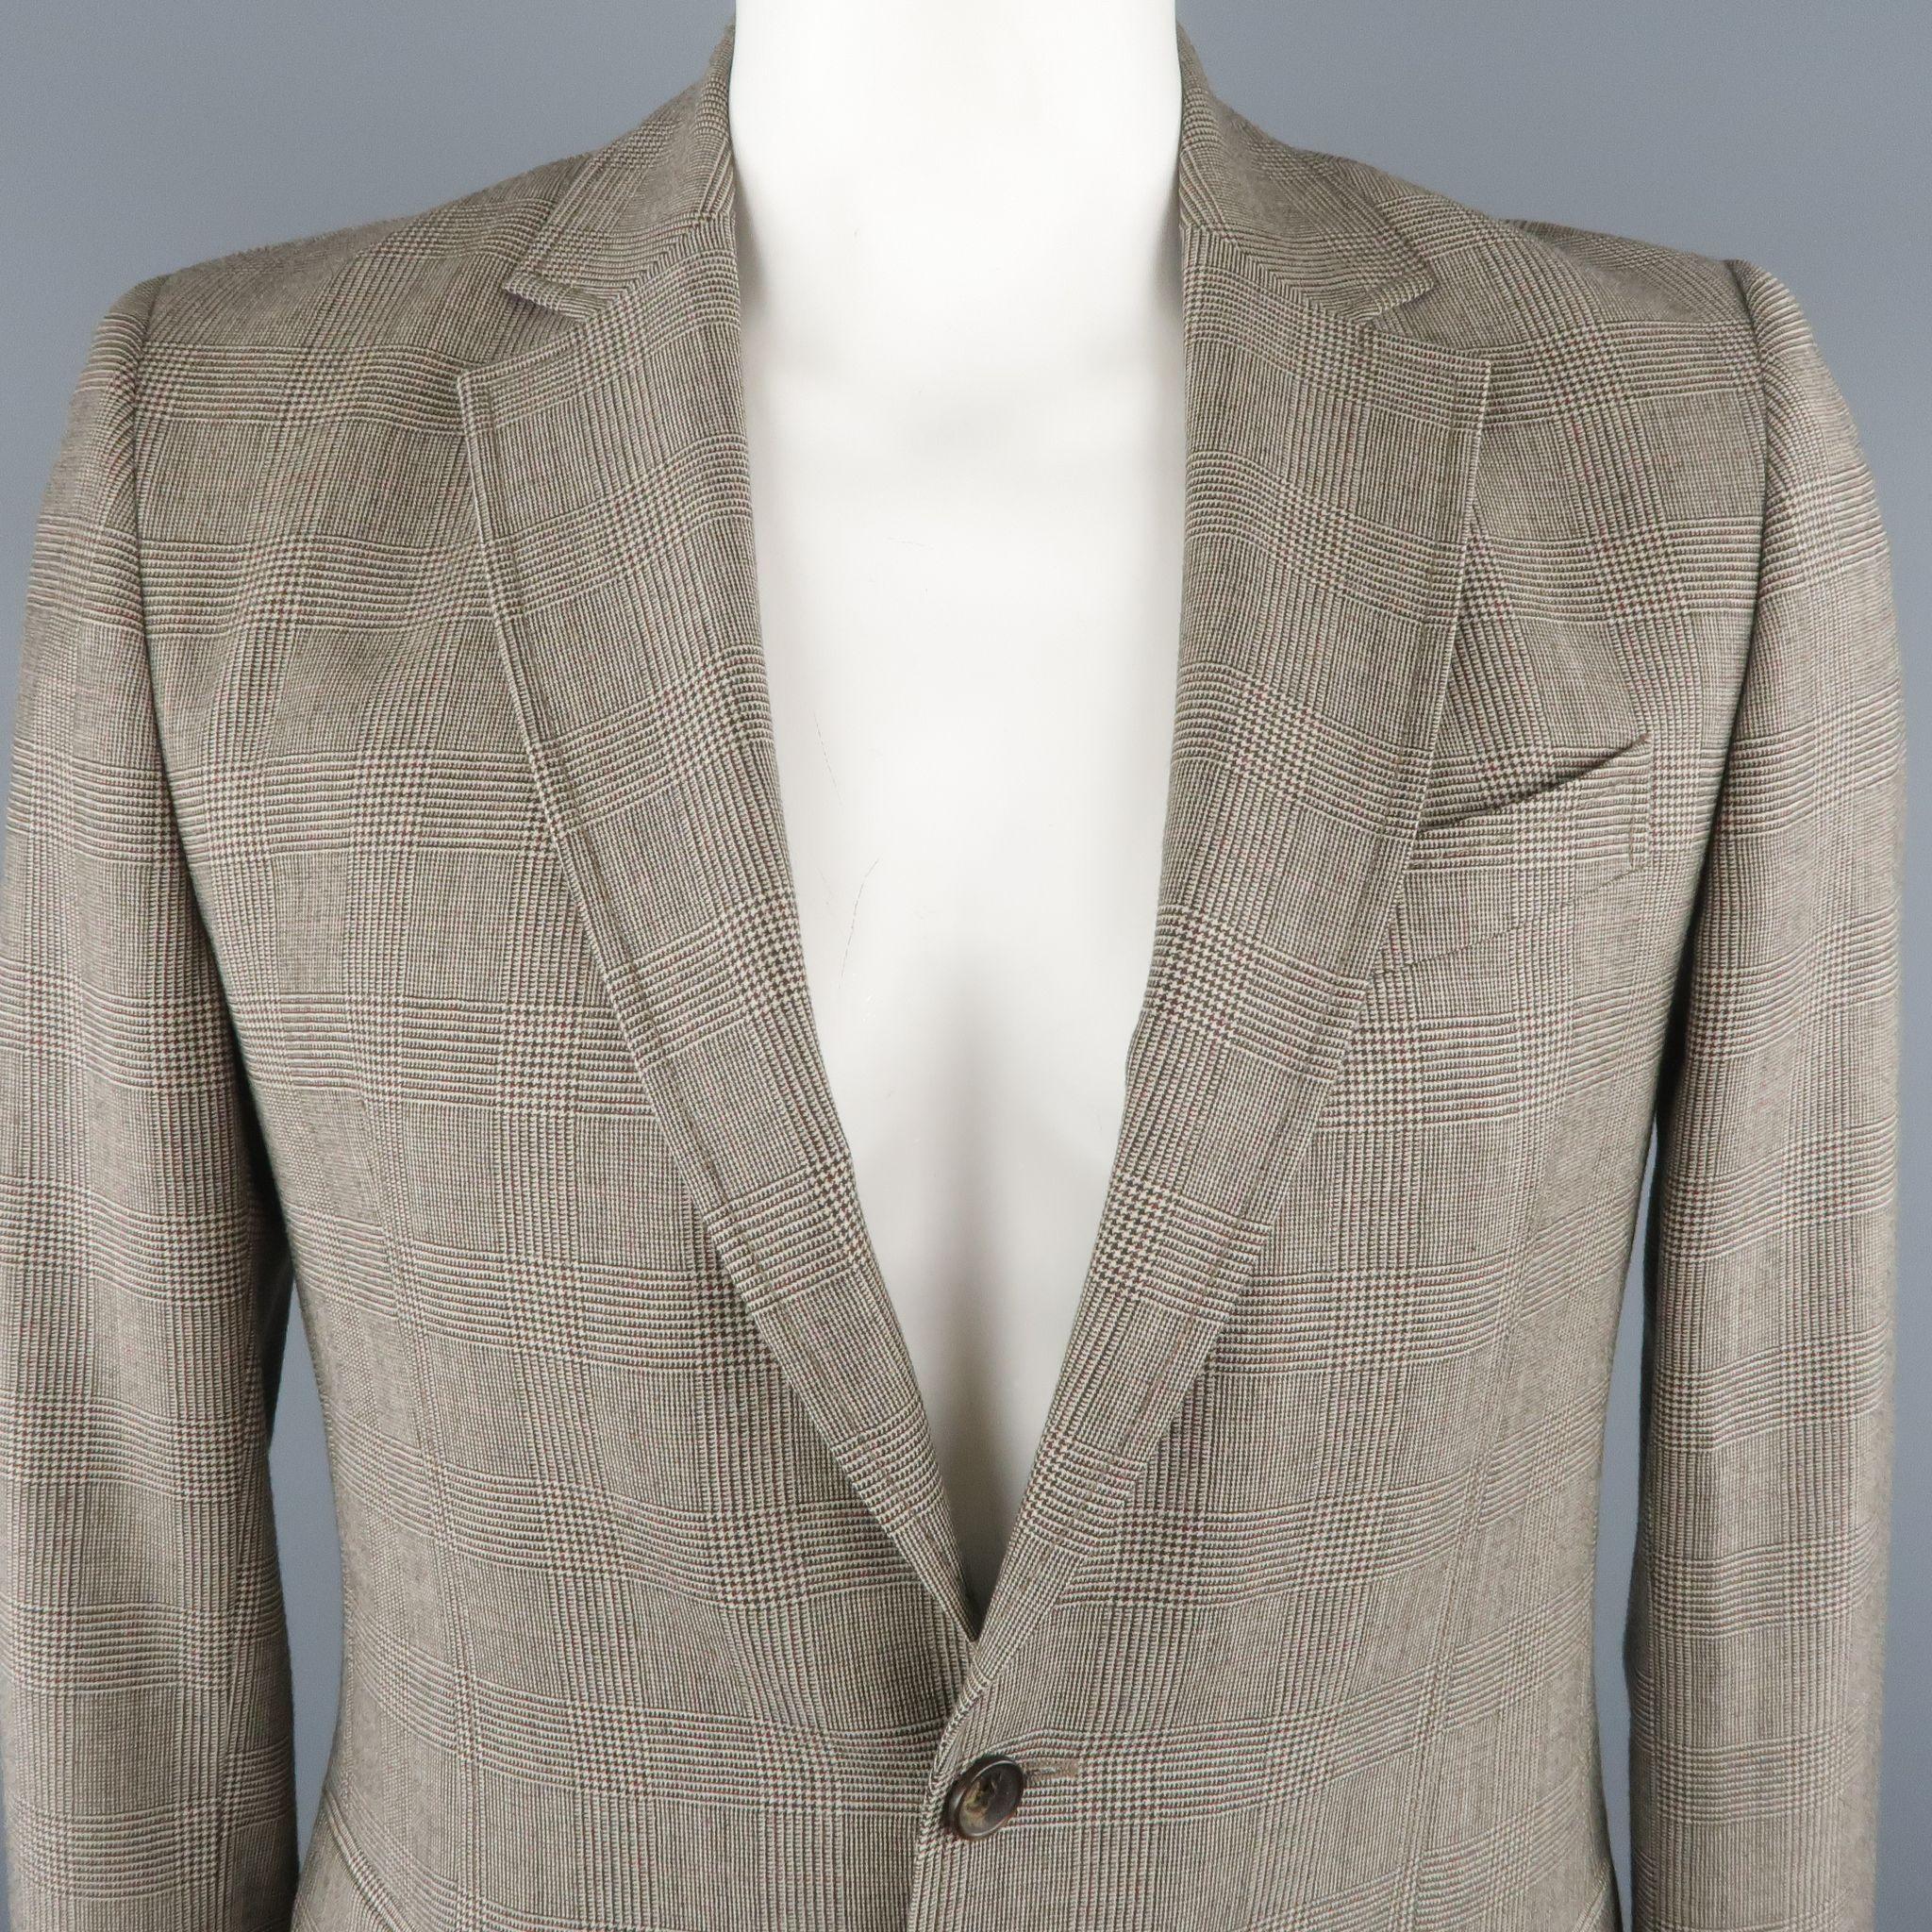 D&G by DOLCE & GABBANA Sport Coat comes in black and white tones in a glenplaid wool material, with a notch lapel, 2 buttons closure, single breasted, slit and flap pockets with a single vent at back. Made in Italy.
 
Excellent Pre-Owned